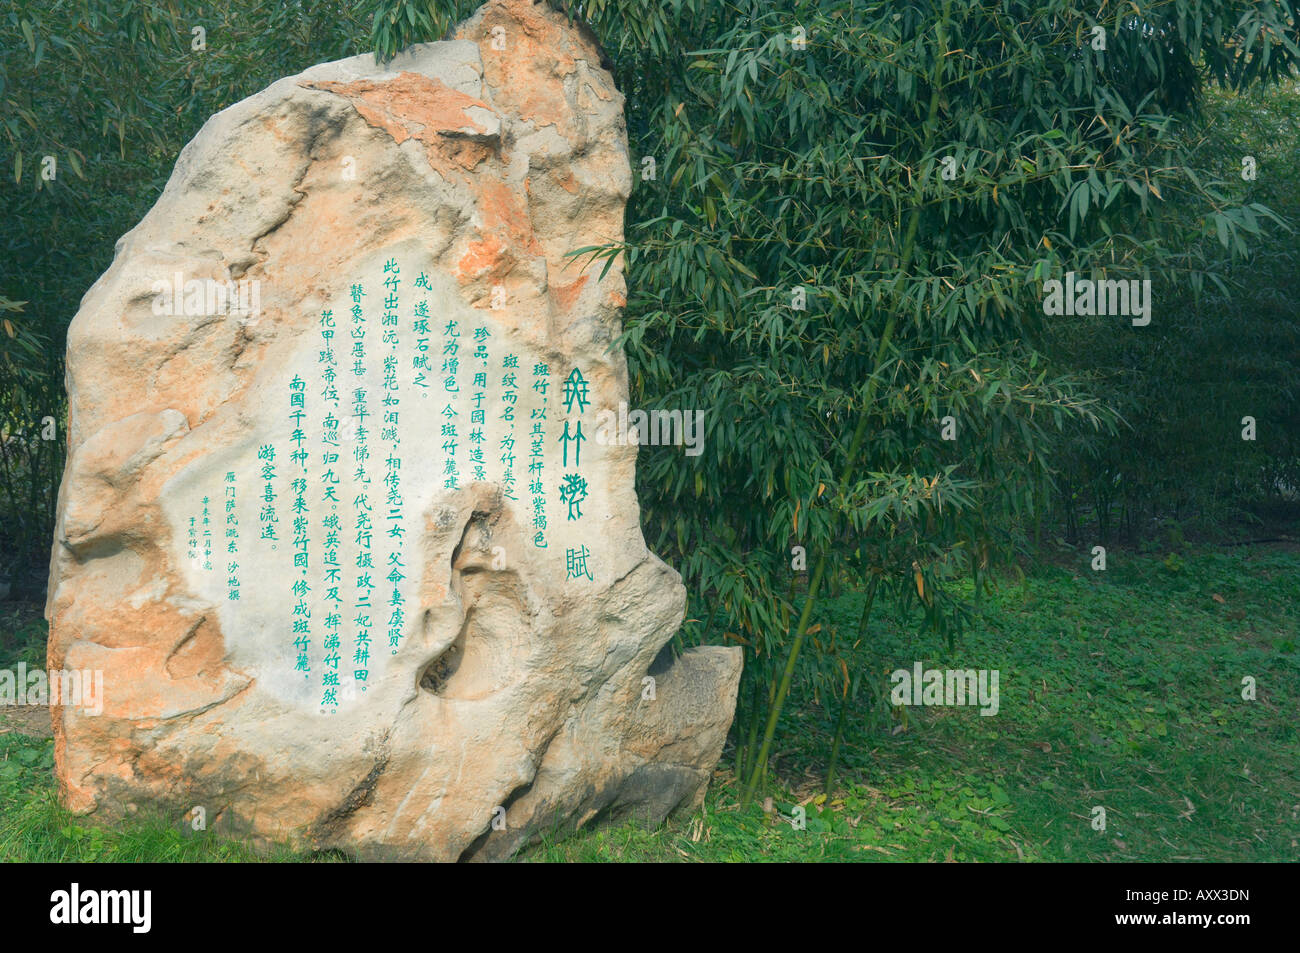 Rock with Chinese writings and bamboo forest, Purple Bamboo Park, Beijing, China, Asia Stock Photo